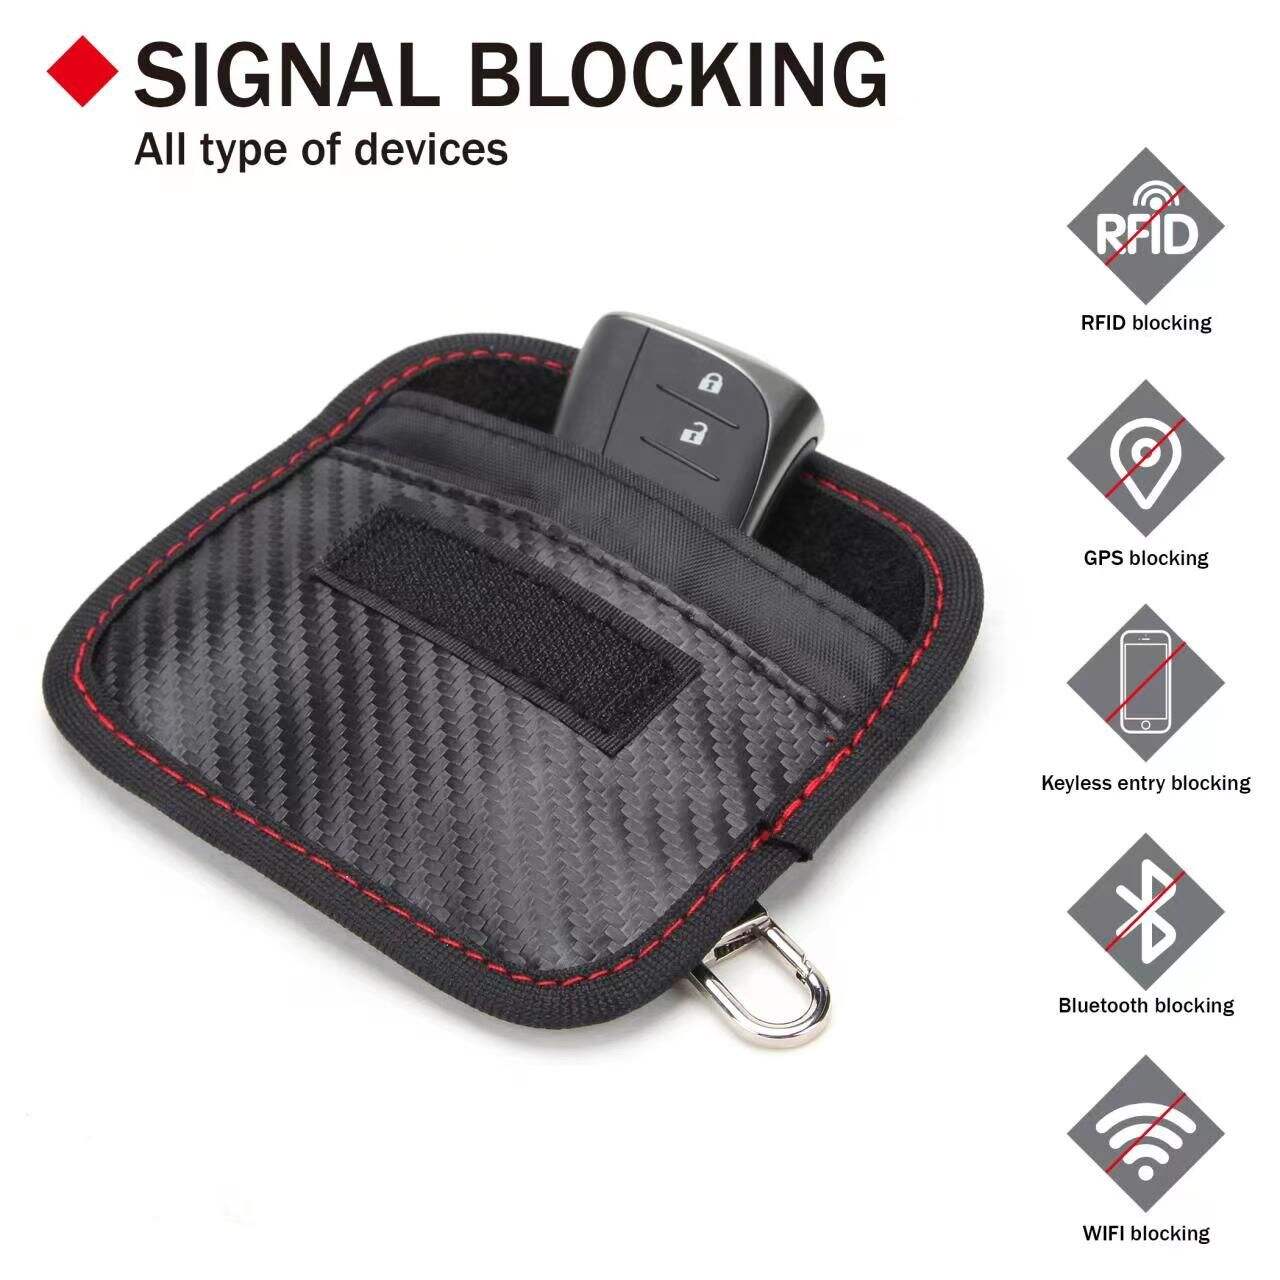 https://media-www.canadiantire.ca/product/automotive/car-care-accessories/auto-accessories/0379852/rfid-signal-blocking-keychain-small-edccd7c4-4937-4272-af23-d30ab33bd324-jpgrendition.jpg?imdensity=1&imwidth=1244&impolicy=mZoom